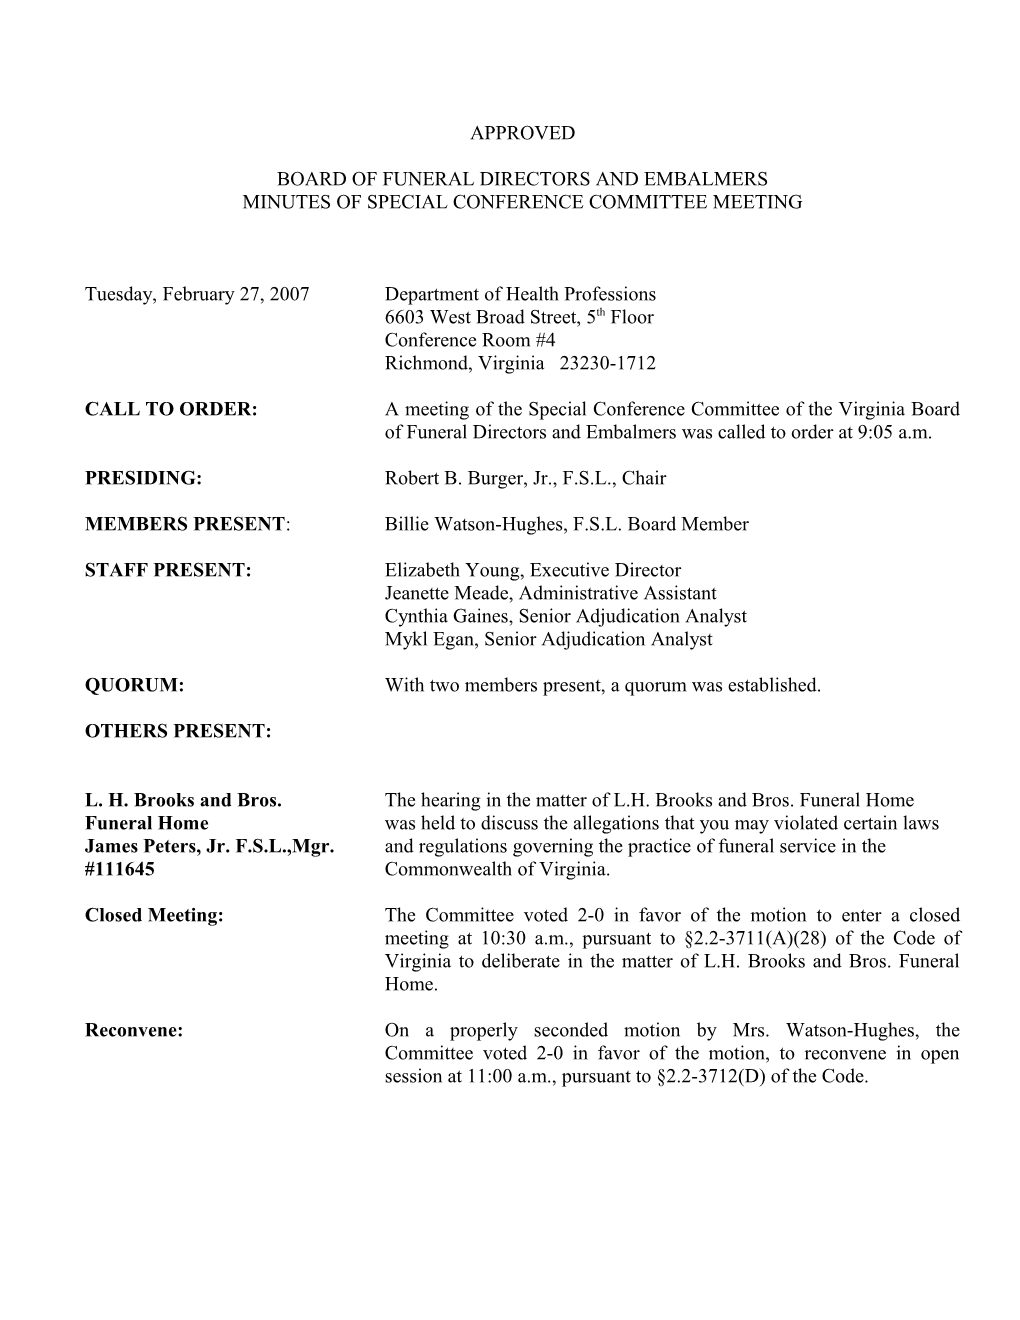 Funeral-Special Conference Committee Meeting Minutes-February 27, 2007